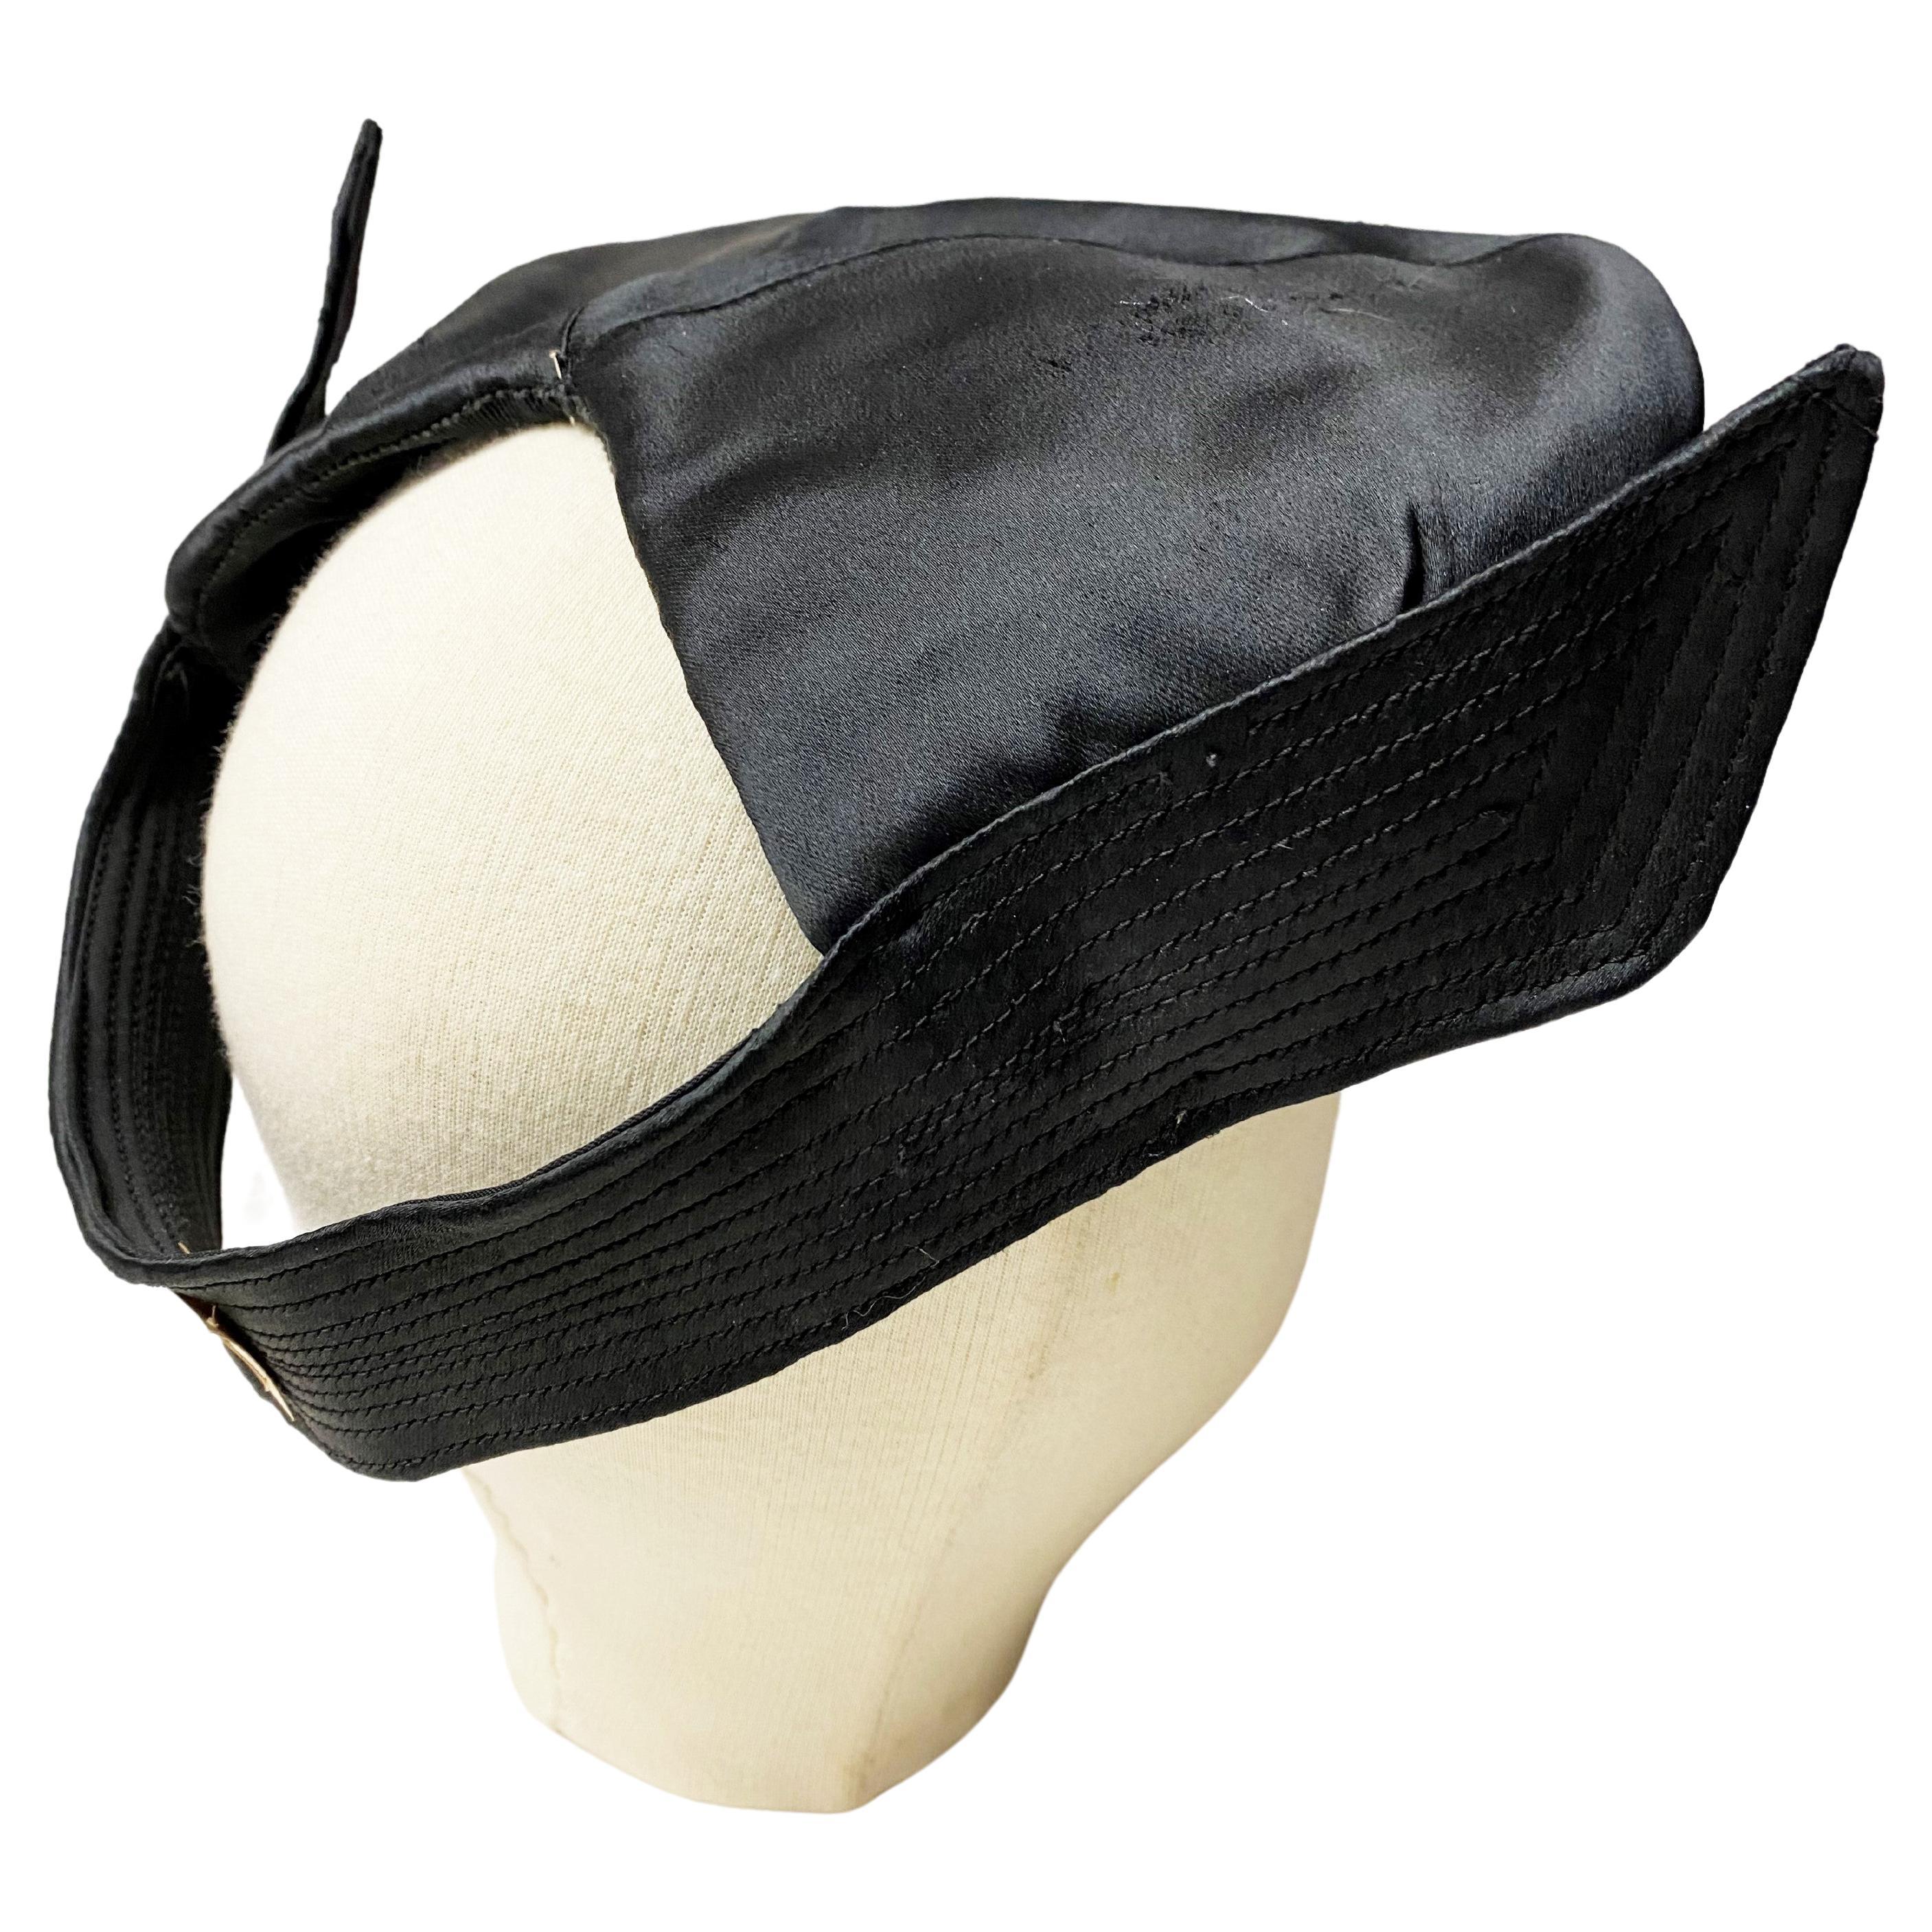 Black satin lady's beret with stitched wings Circa 1945